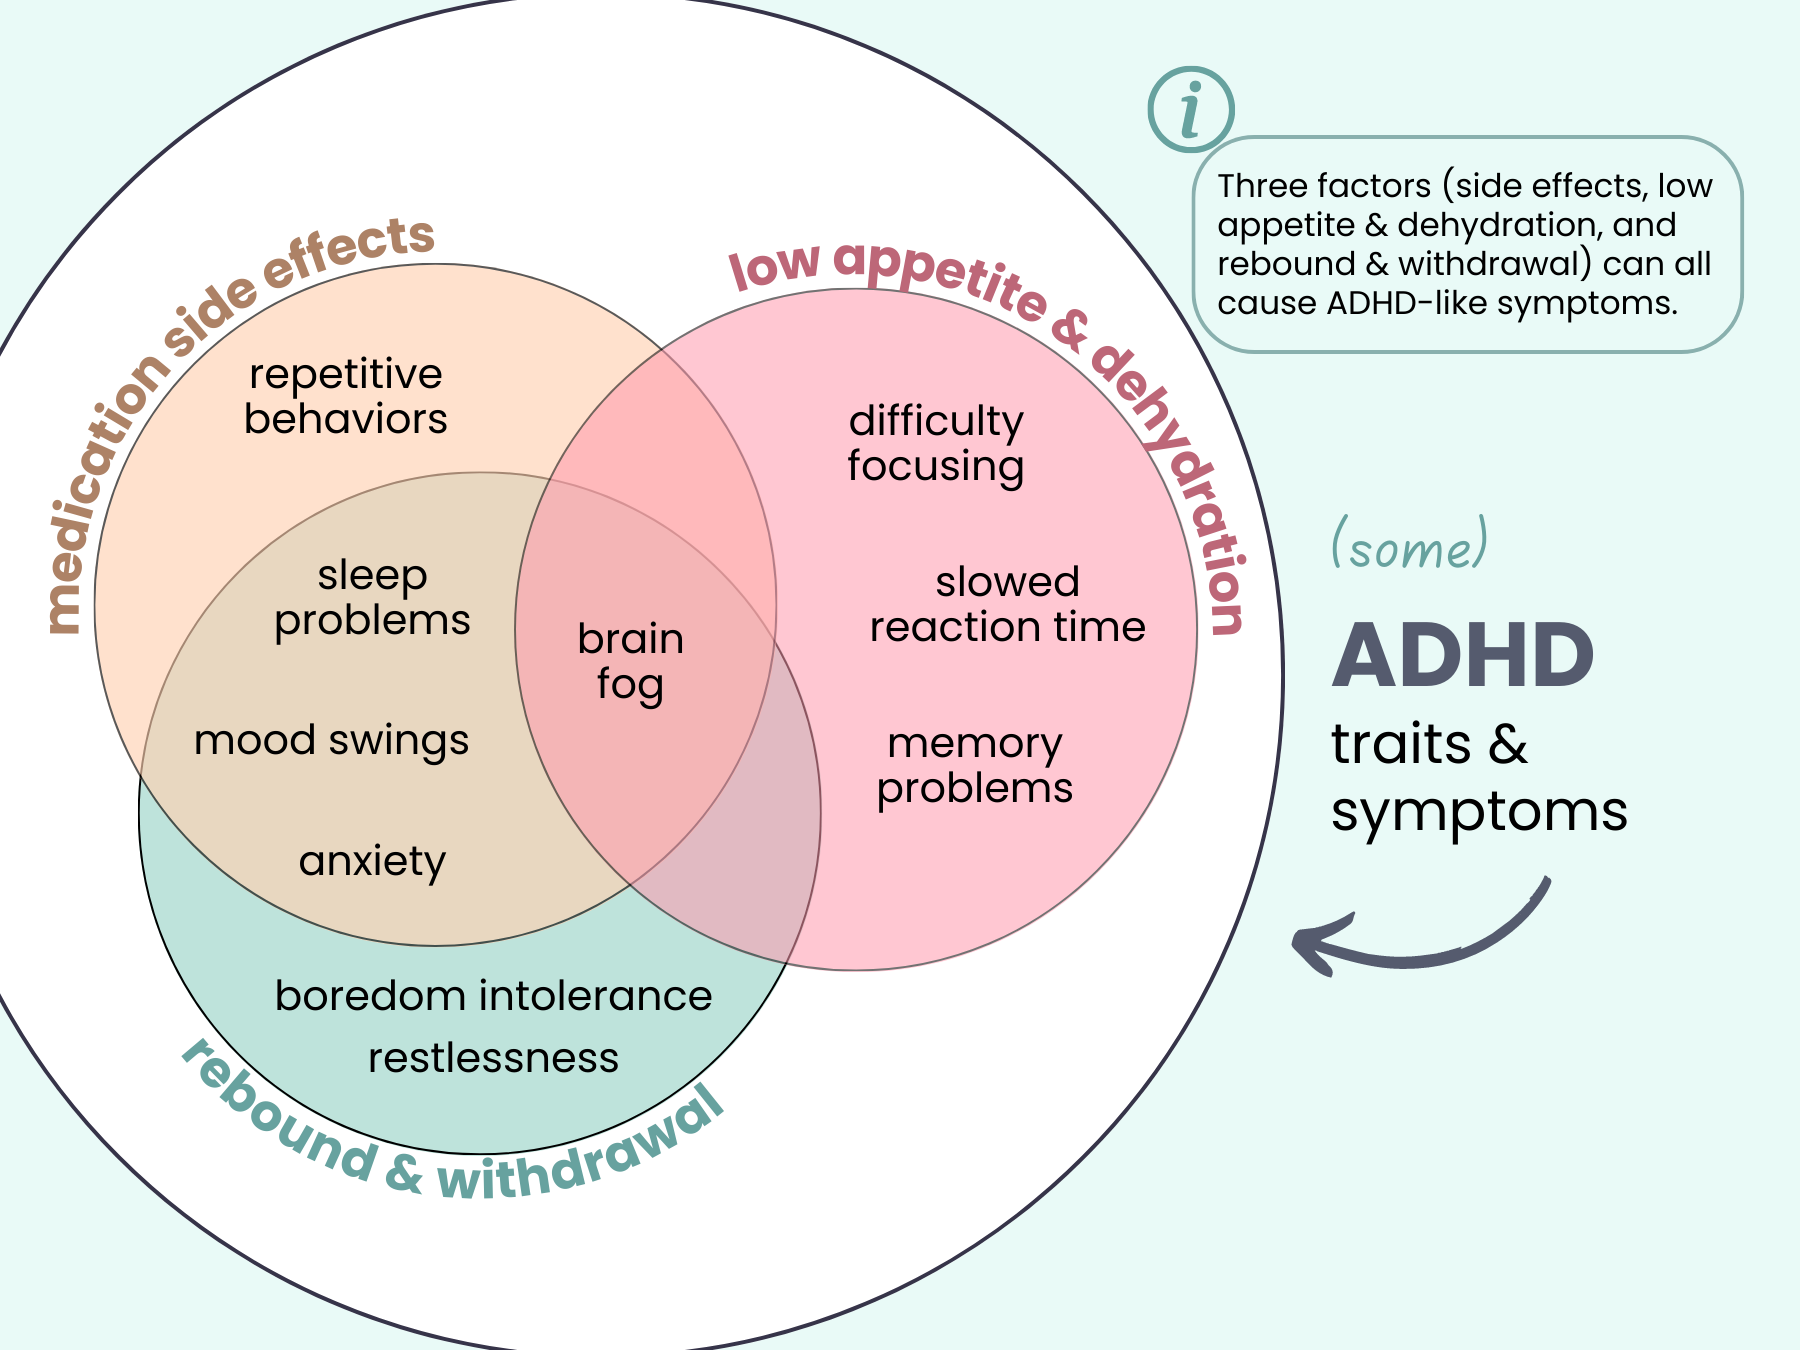 Venn diagram of 3 intersecting circles captioned: "3 factors (1: side effects, 2: low appetite & dehydration, 3: rebound & withdrawal) can all cause ADHD-like symptoms." Central to all circles is brain fog. Circles 1 and 3 also intersect in: sleep problems, mood swings, and anxiety. Symptoms exclusive to circle 2 are: difficulty focusing, slowed reaction time, and memory problems; for 3 they are boredom intolerance and restlessness; for 1 it's repetitive behaviors.